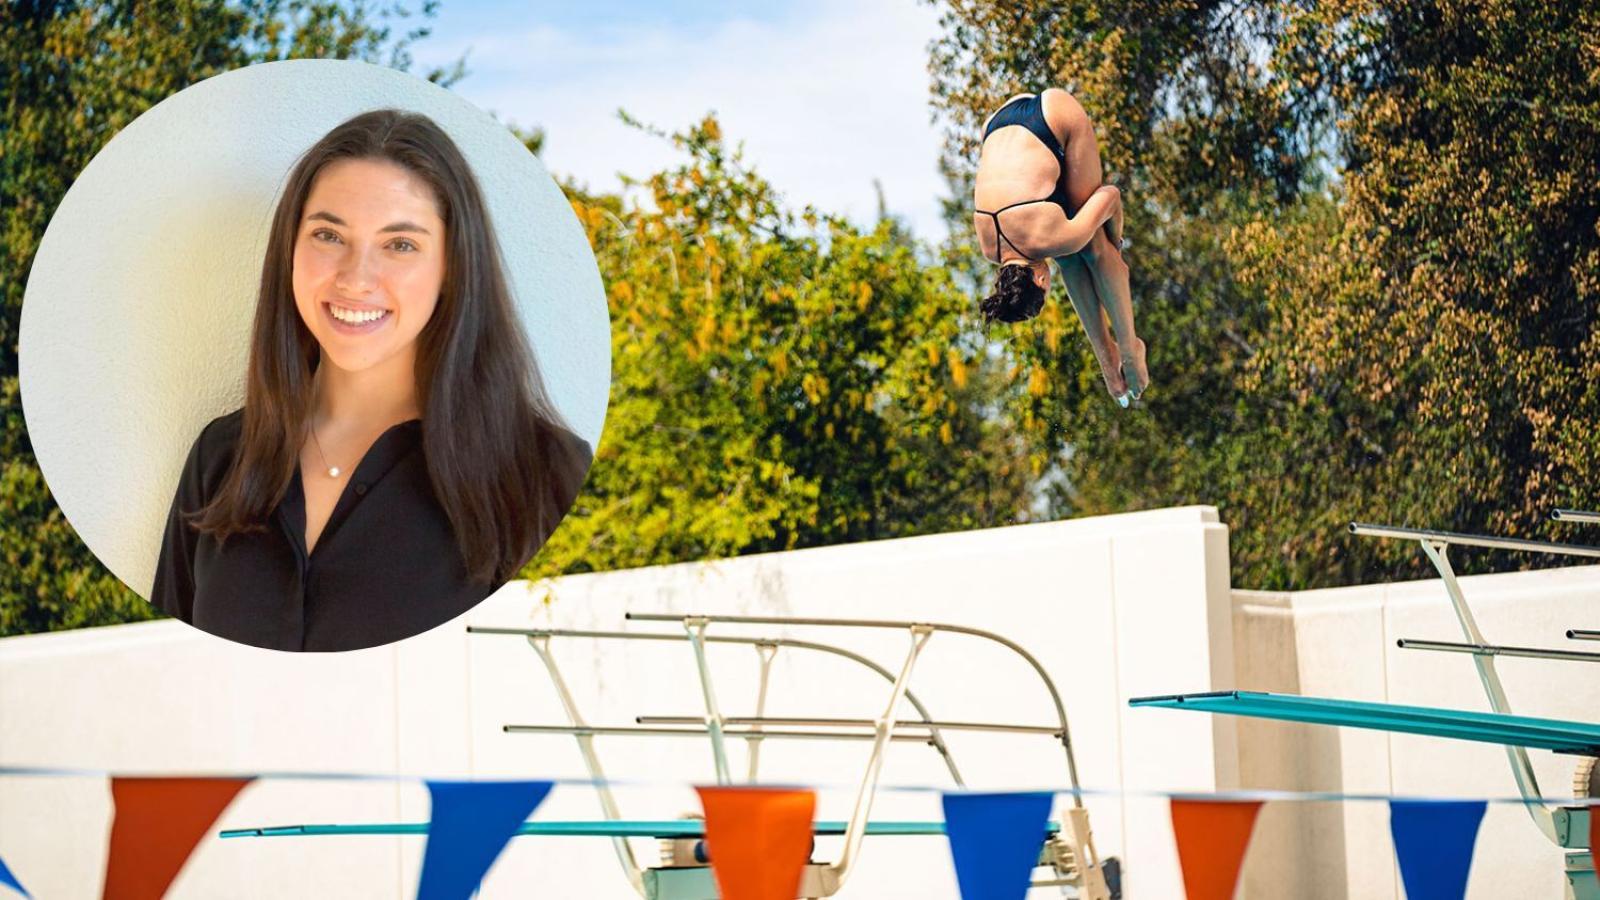 Ruby Epstein '22 headshot and action shot of springboard dive